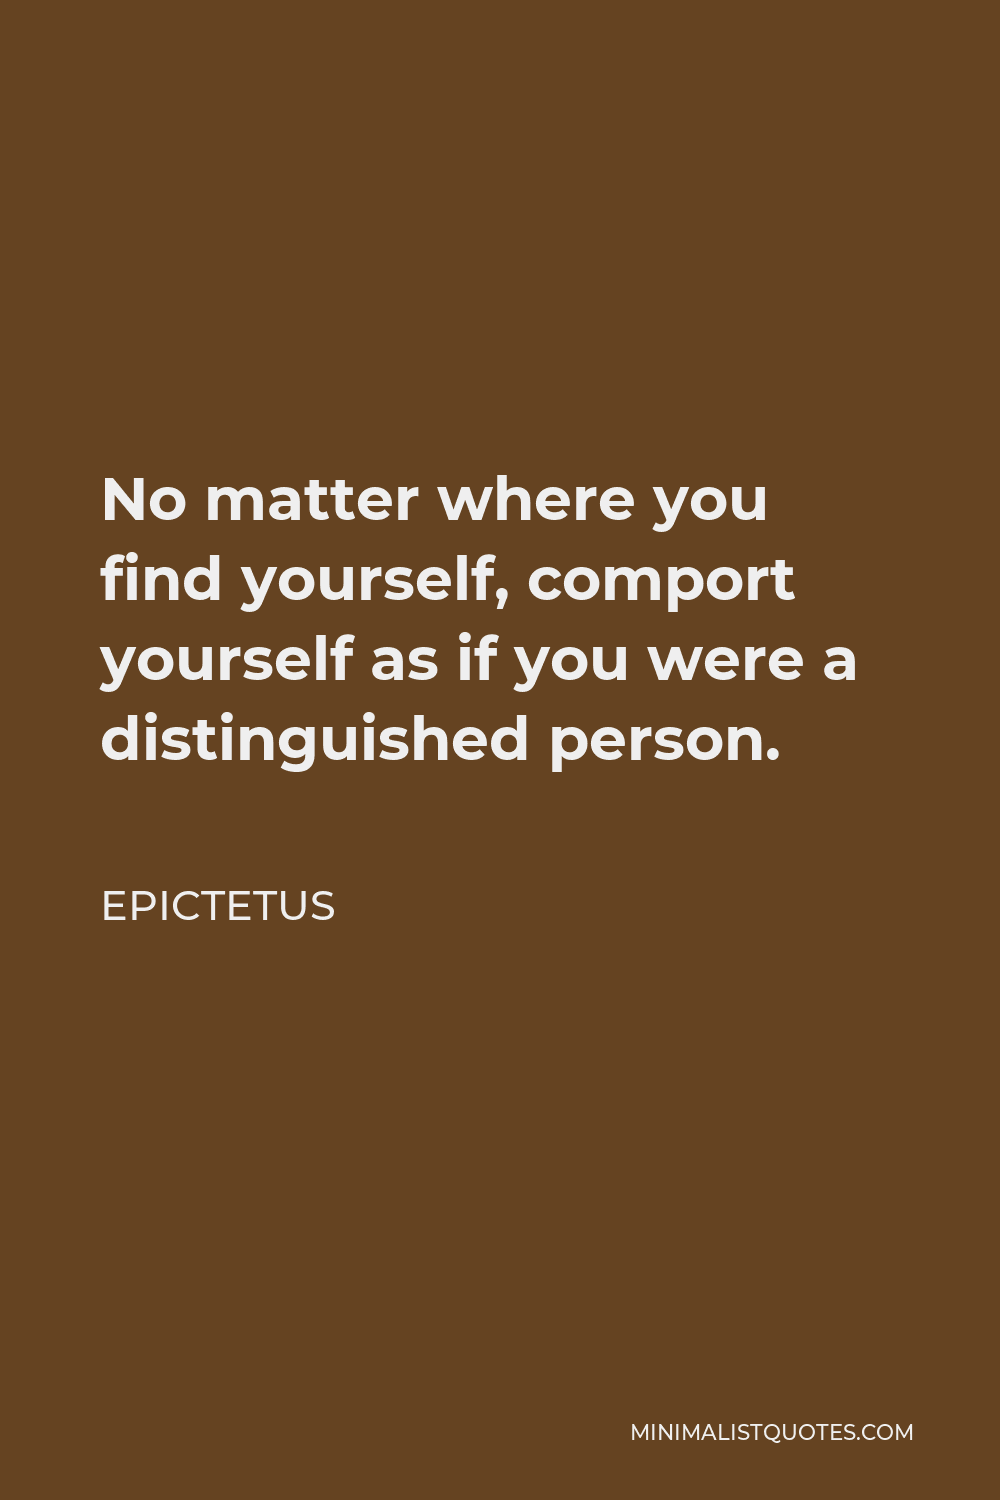 Epictetus Quote - No matter where you find yourself, comport yourself as if you were a distinguished person.